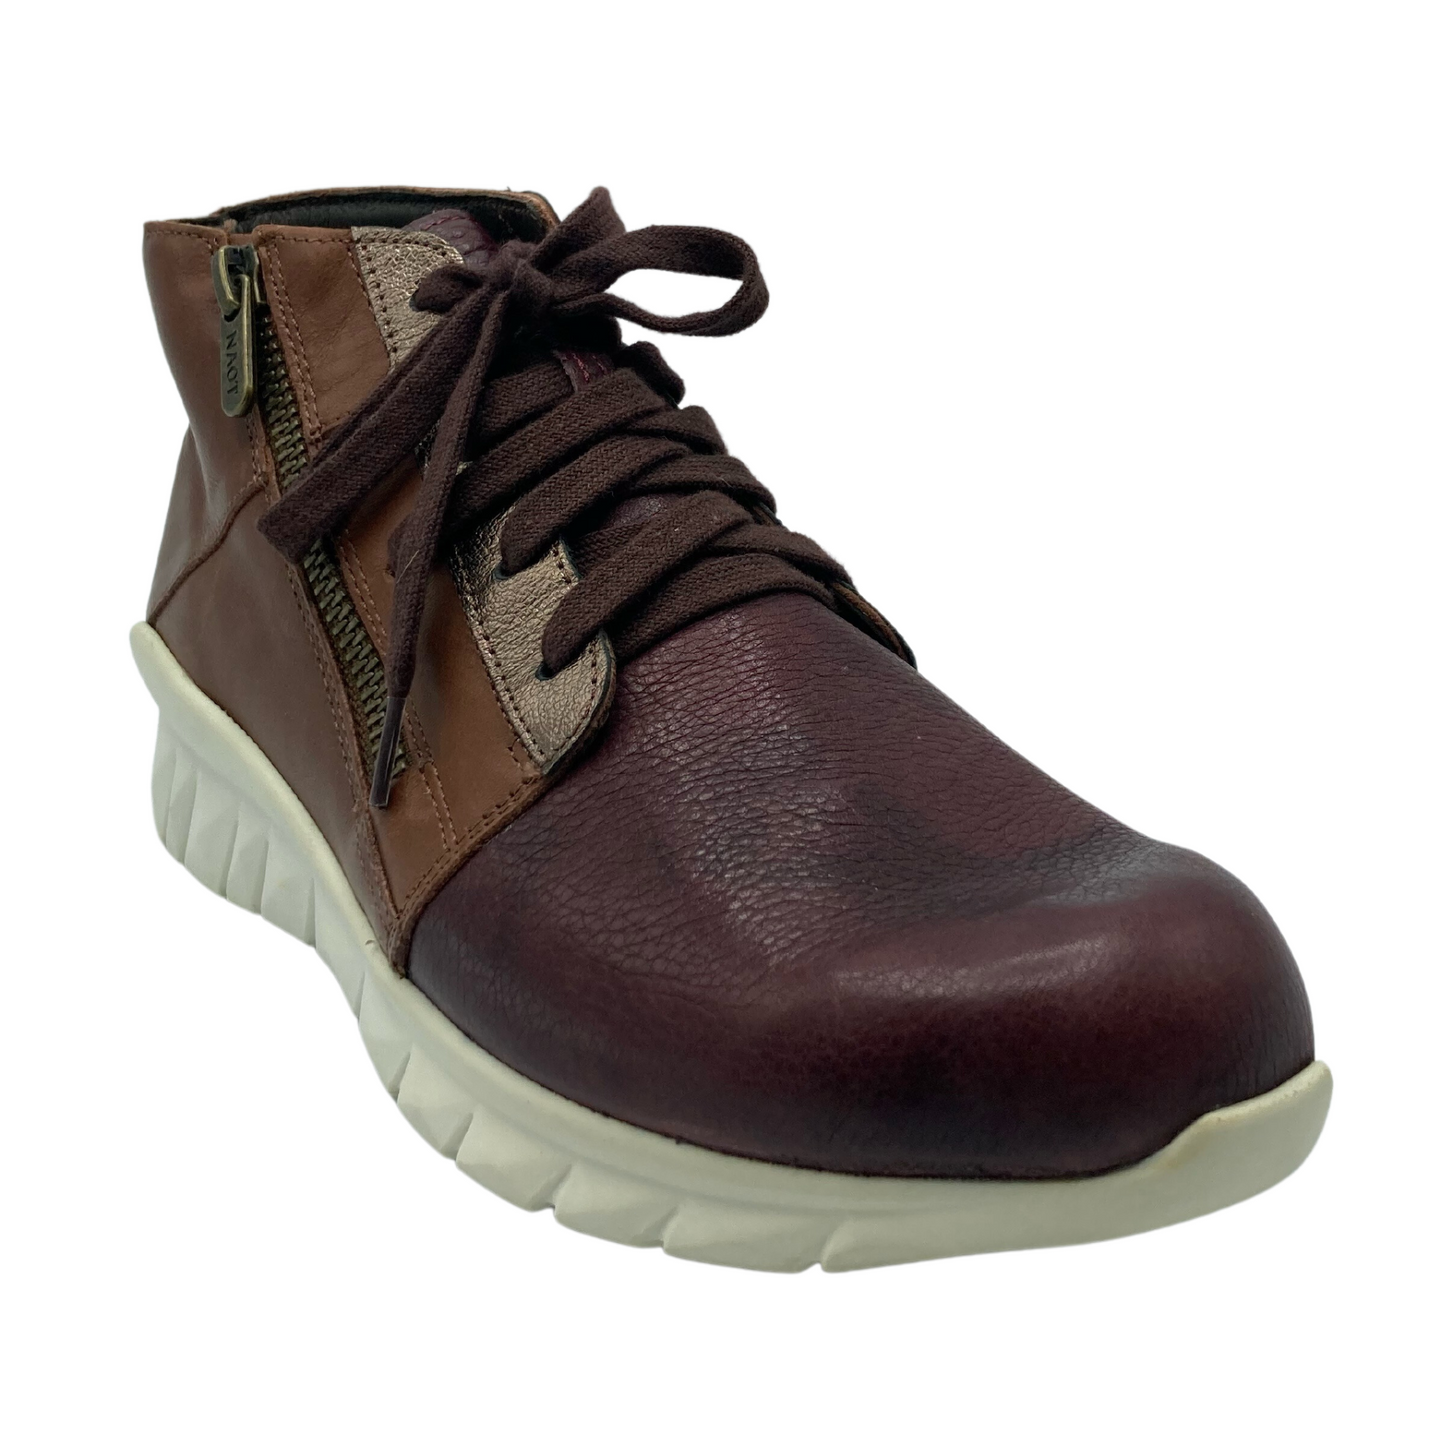 45 degree angled view of brown leather sneaker with brown laces and zipper closure